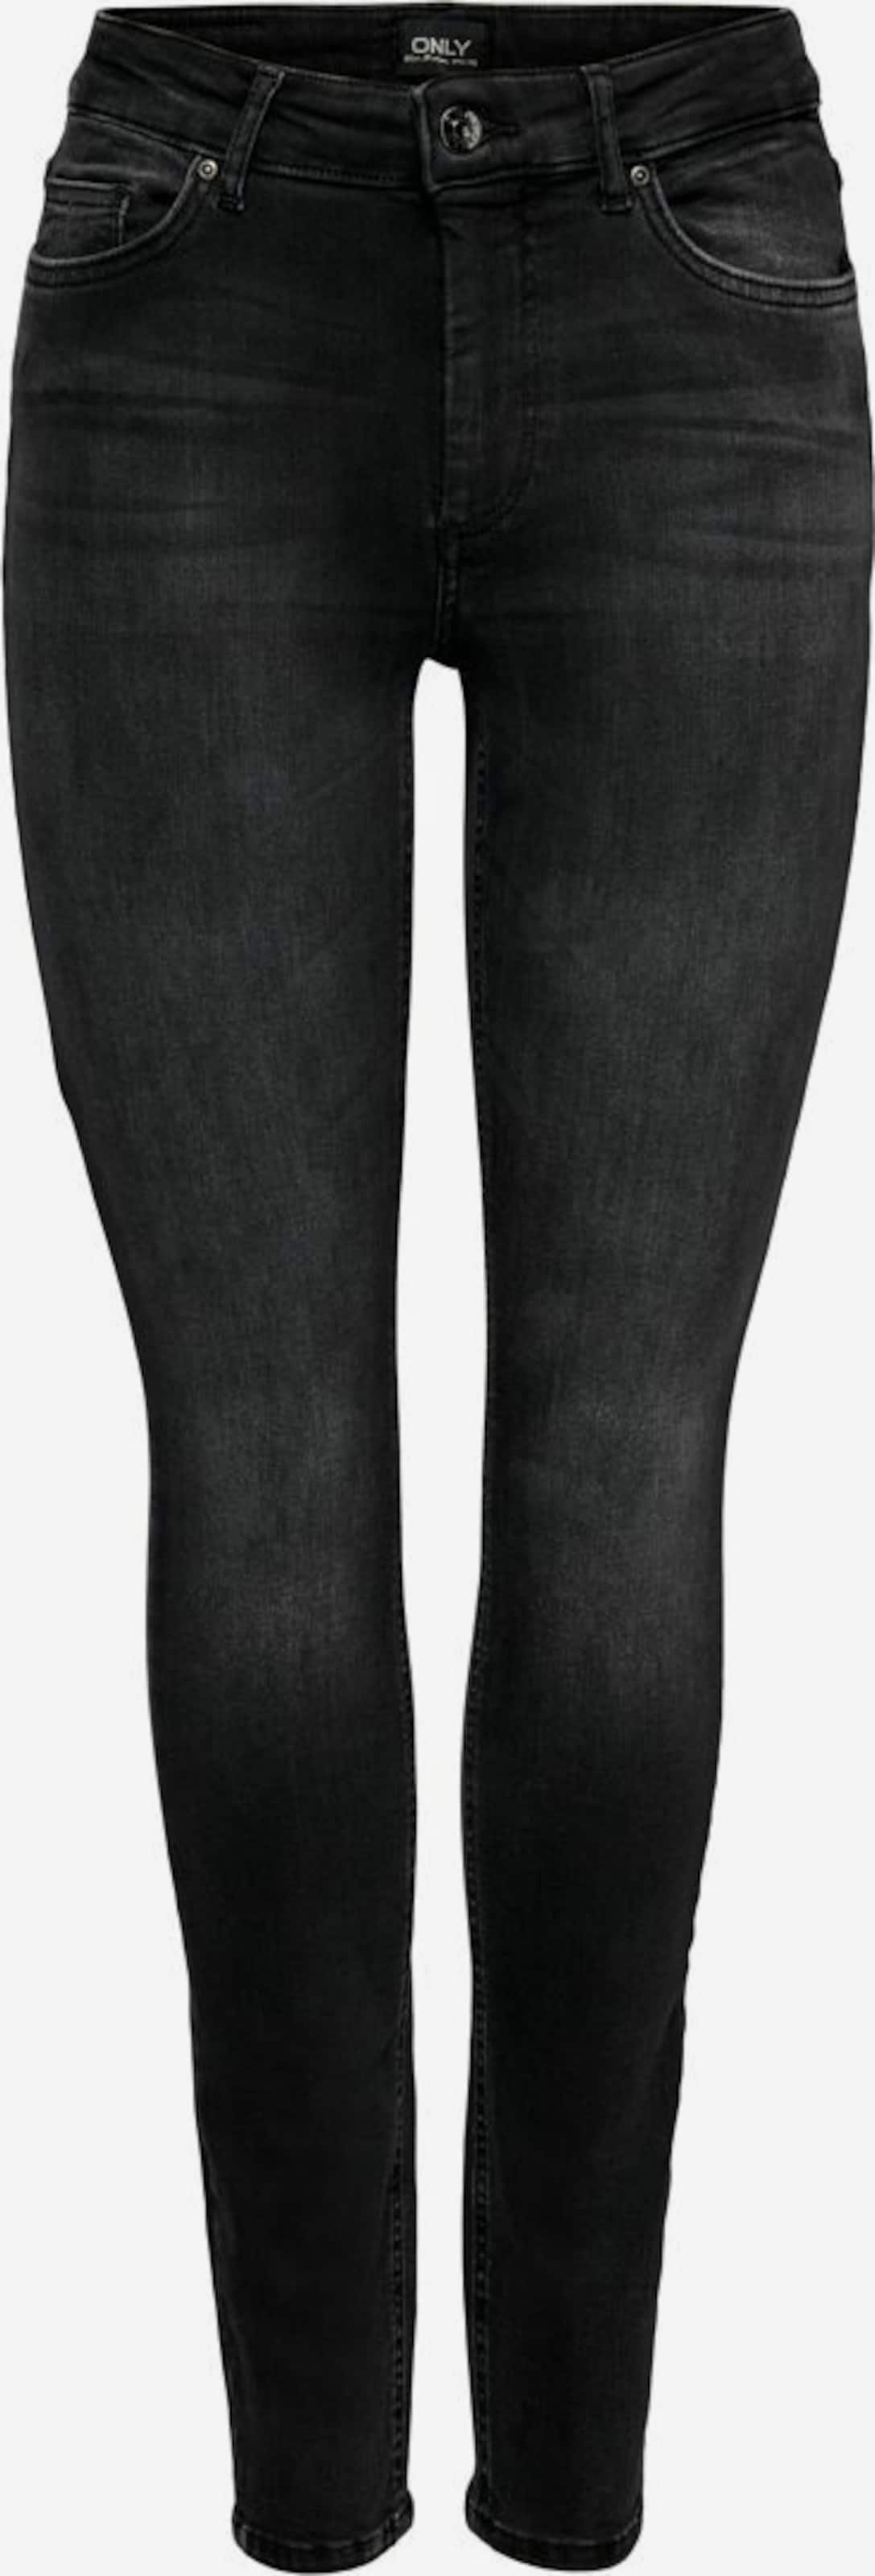 Kruipen Peru Kabelbaan ONLY Skinny Jeans 'BLUSH' in Black | ABOUT YOU